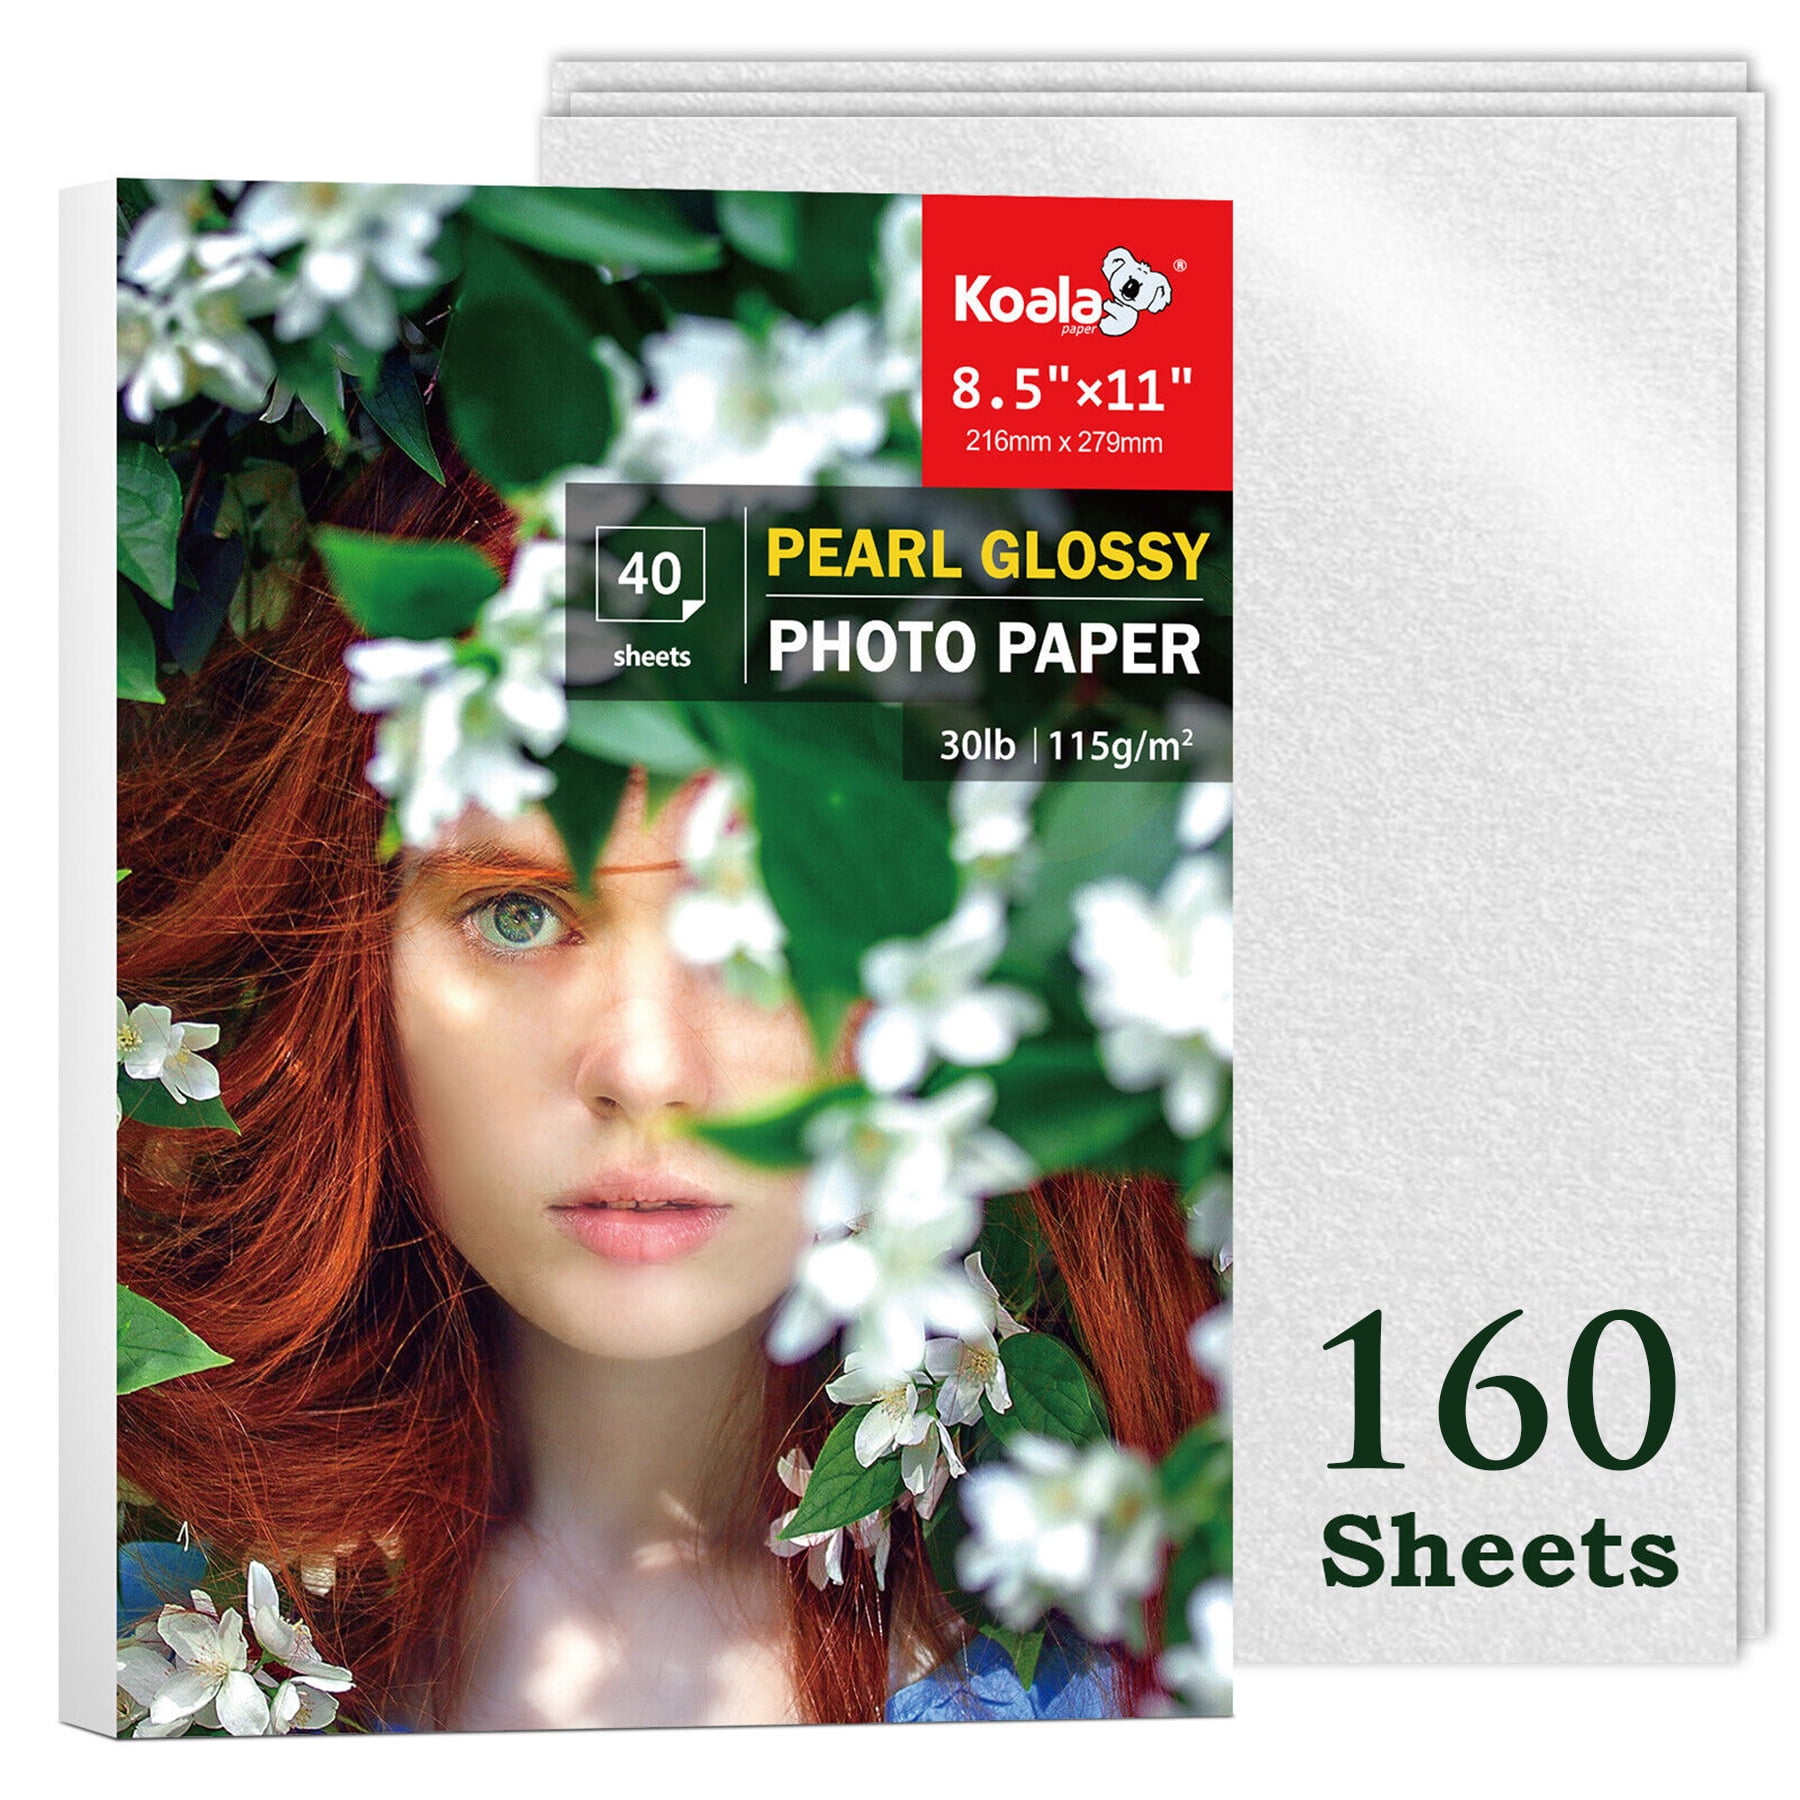 Koala Glossy Thin Inkjet Paper for DIY Chip Bag 8.5x11 Inches 100 Sheets  and Pearl Glossy Thin Photo Paper 8.5x11 Inches 40 Sheets 30lbs